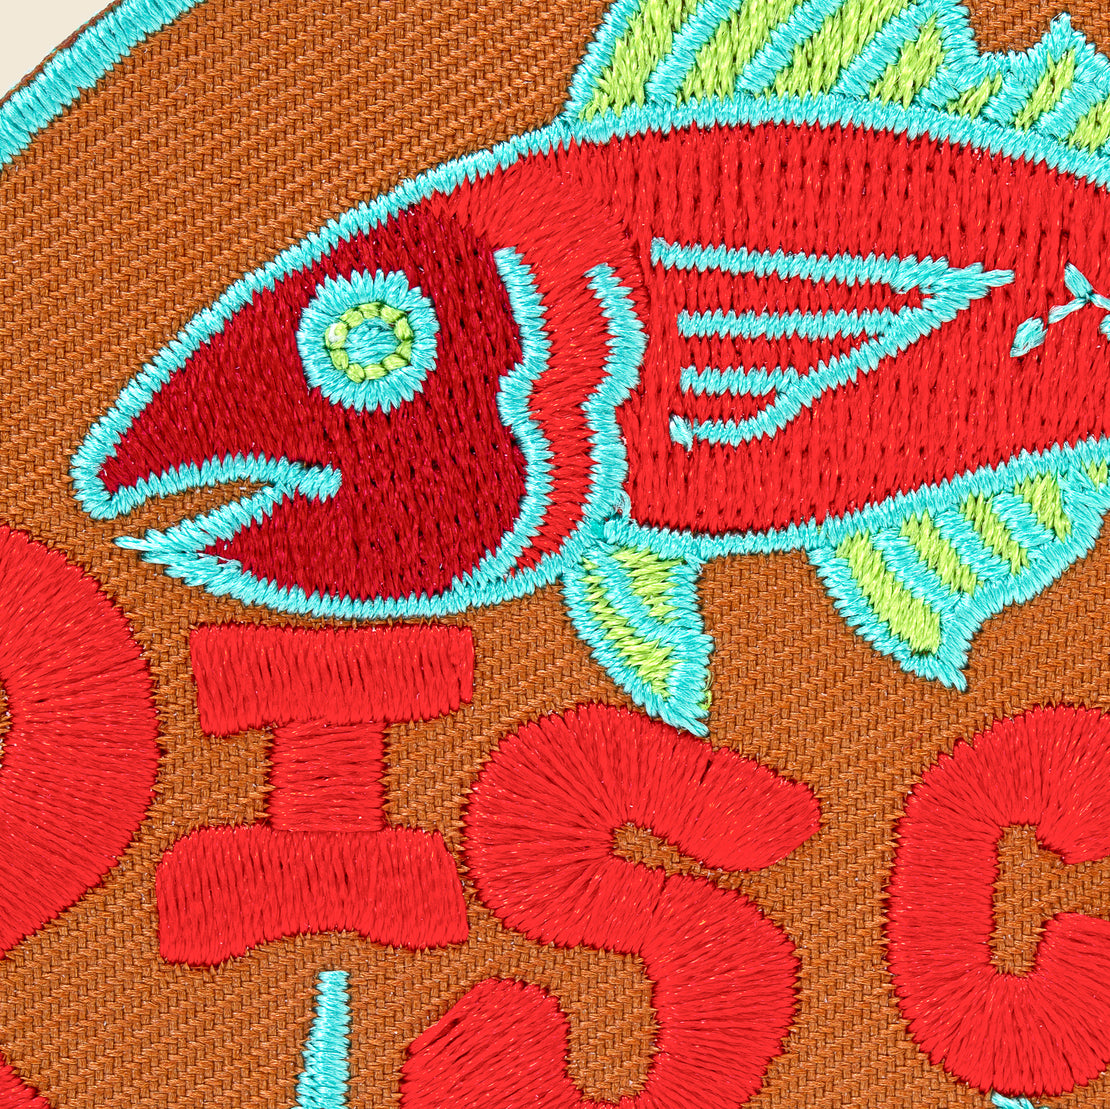 Astrology Patch - Pisces - Fort Lonesome - STAG Provisions - Accessories - Patches